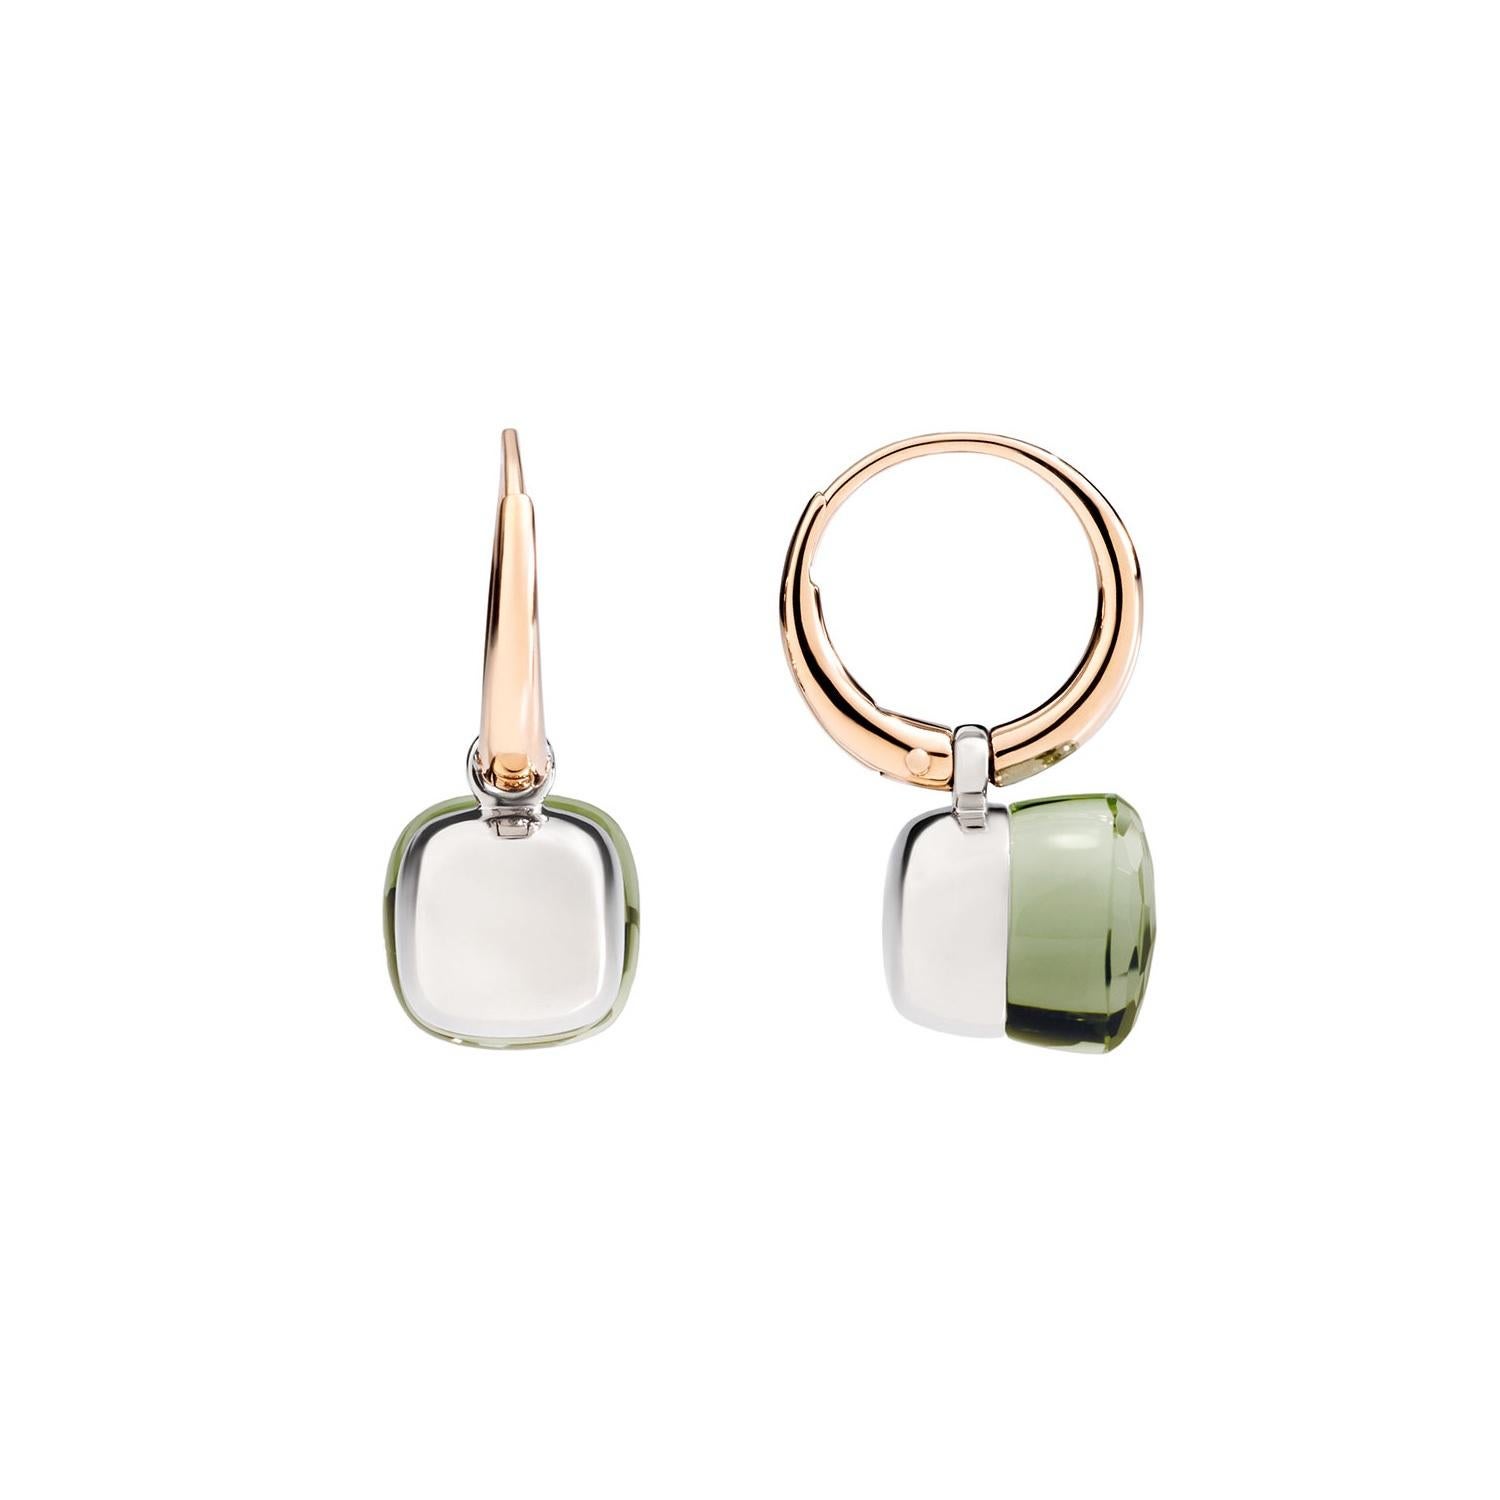 EARRINGS NUDO PETIT IN ROSE GOLD AND WHITE GOLD WITH Prasiolite
The sleek and chic personality of the brand's most iconic ring lives on in this spectacular pair of earrings characterised by a 'nude' stone available in a variety of fabulous colours.